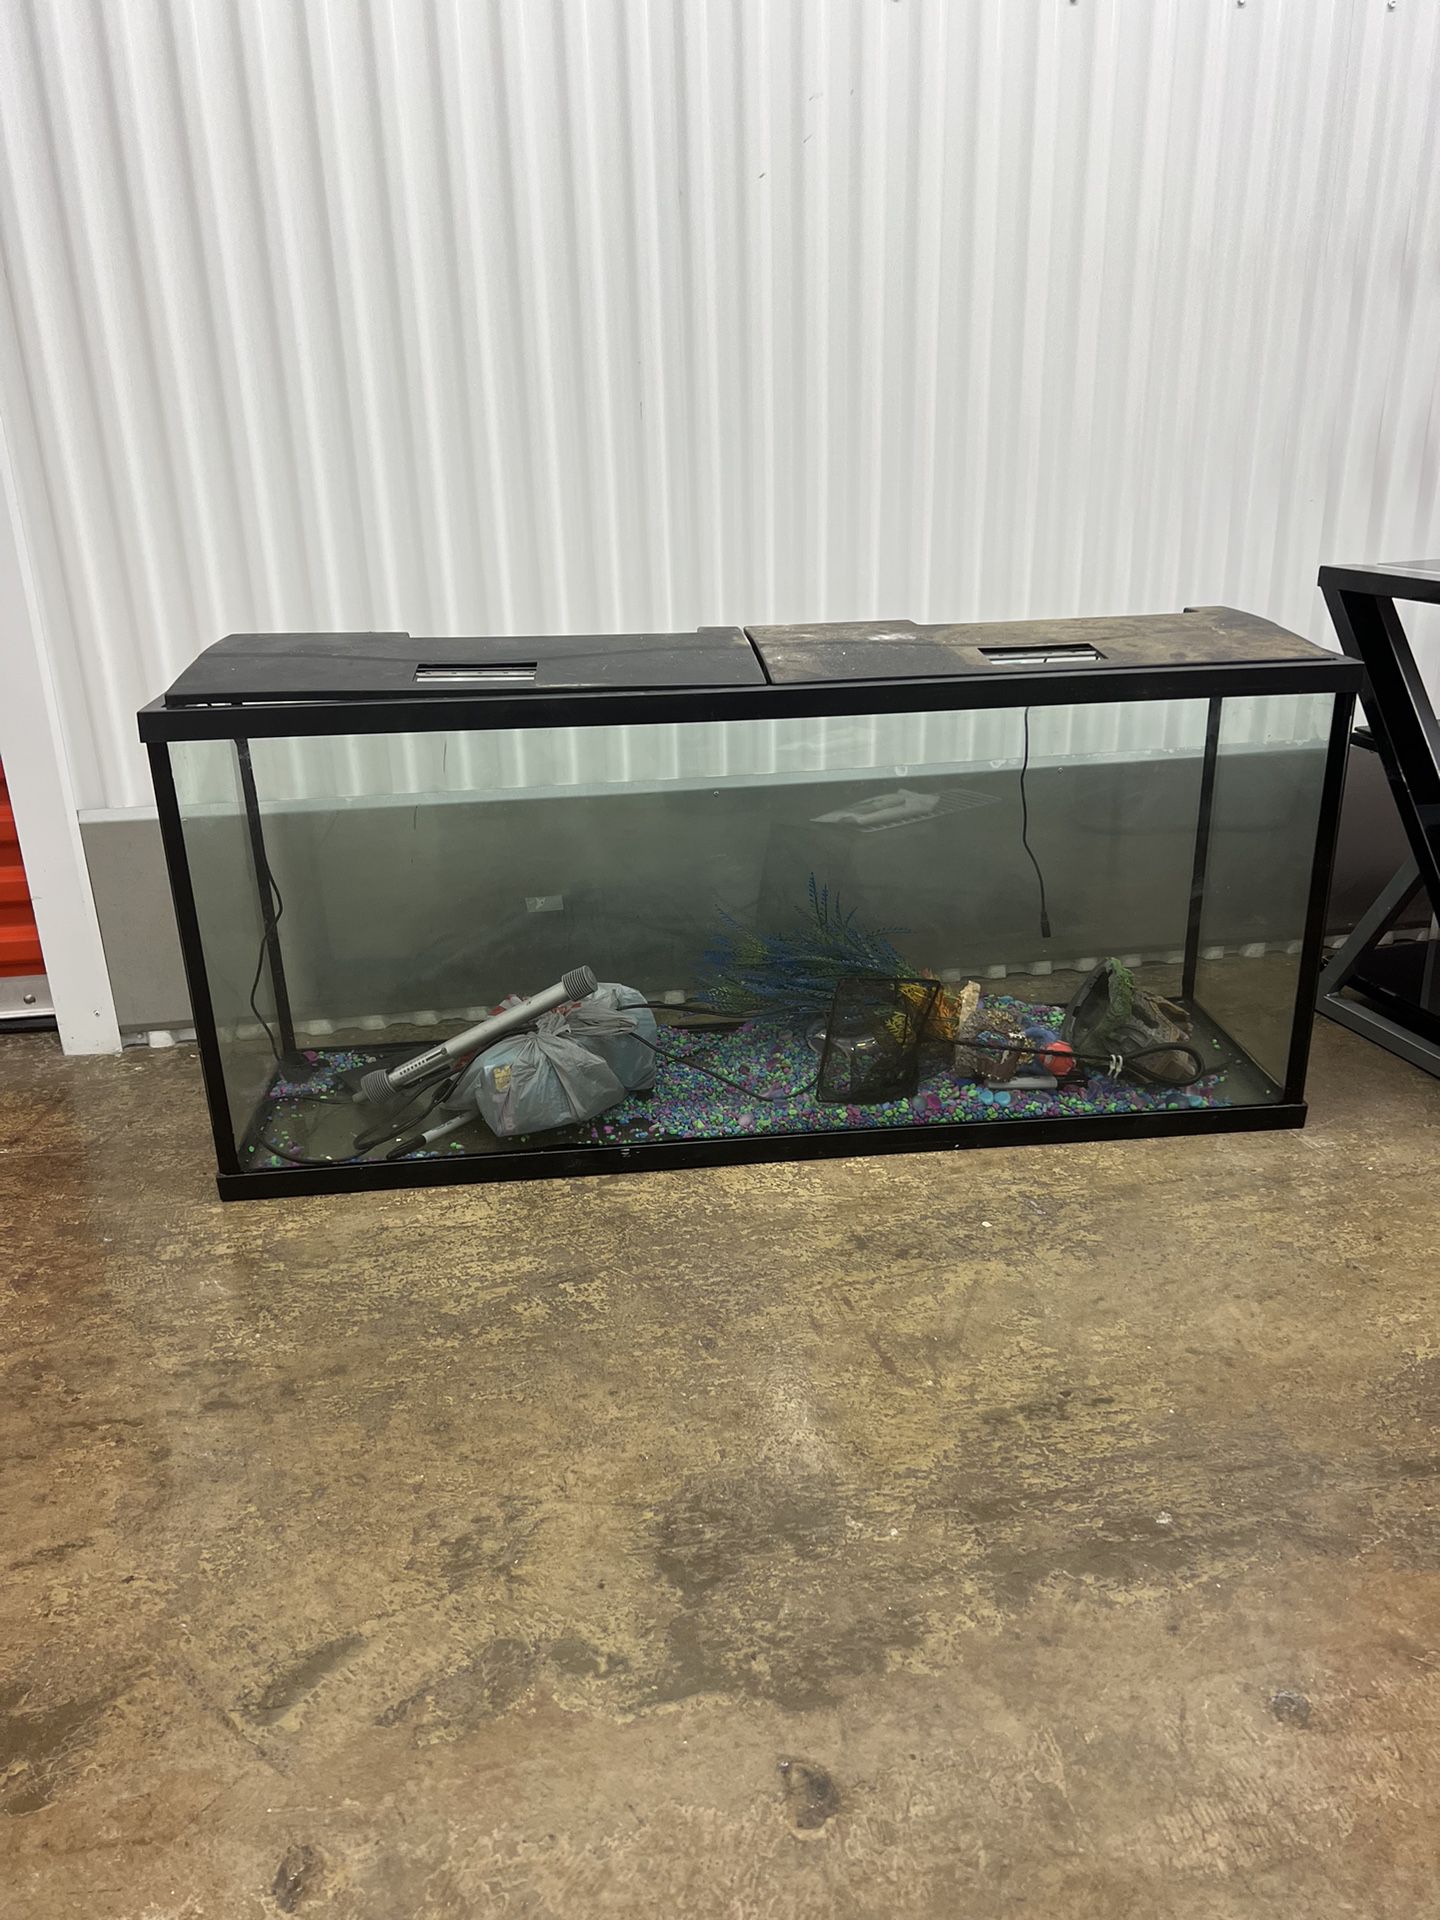 55 Gallon Fish Tank Everything With It $300 Price Reduce 250